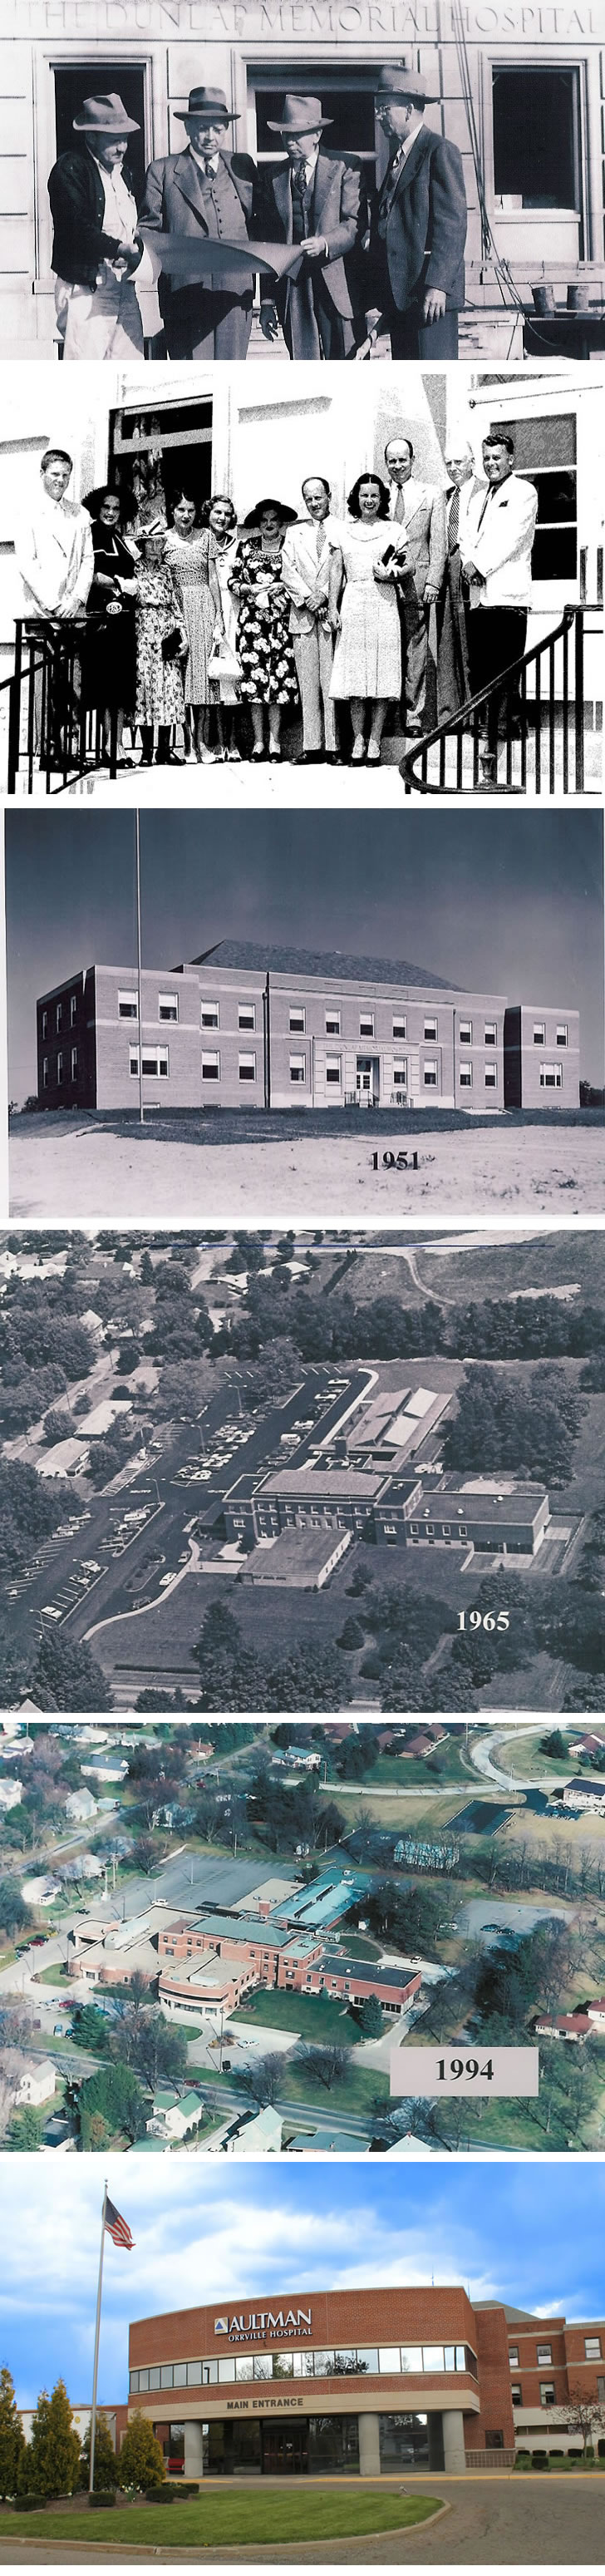 Photos of Aultman Orrville Hospital Through the Years